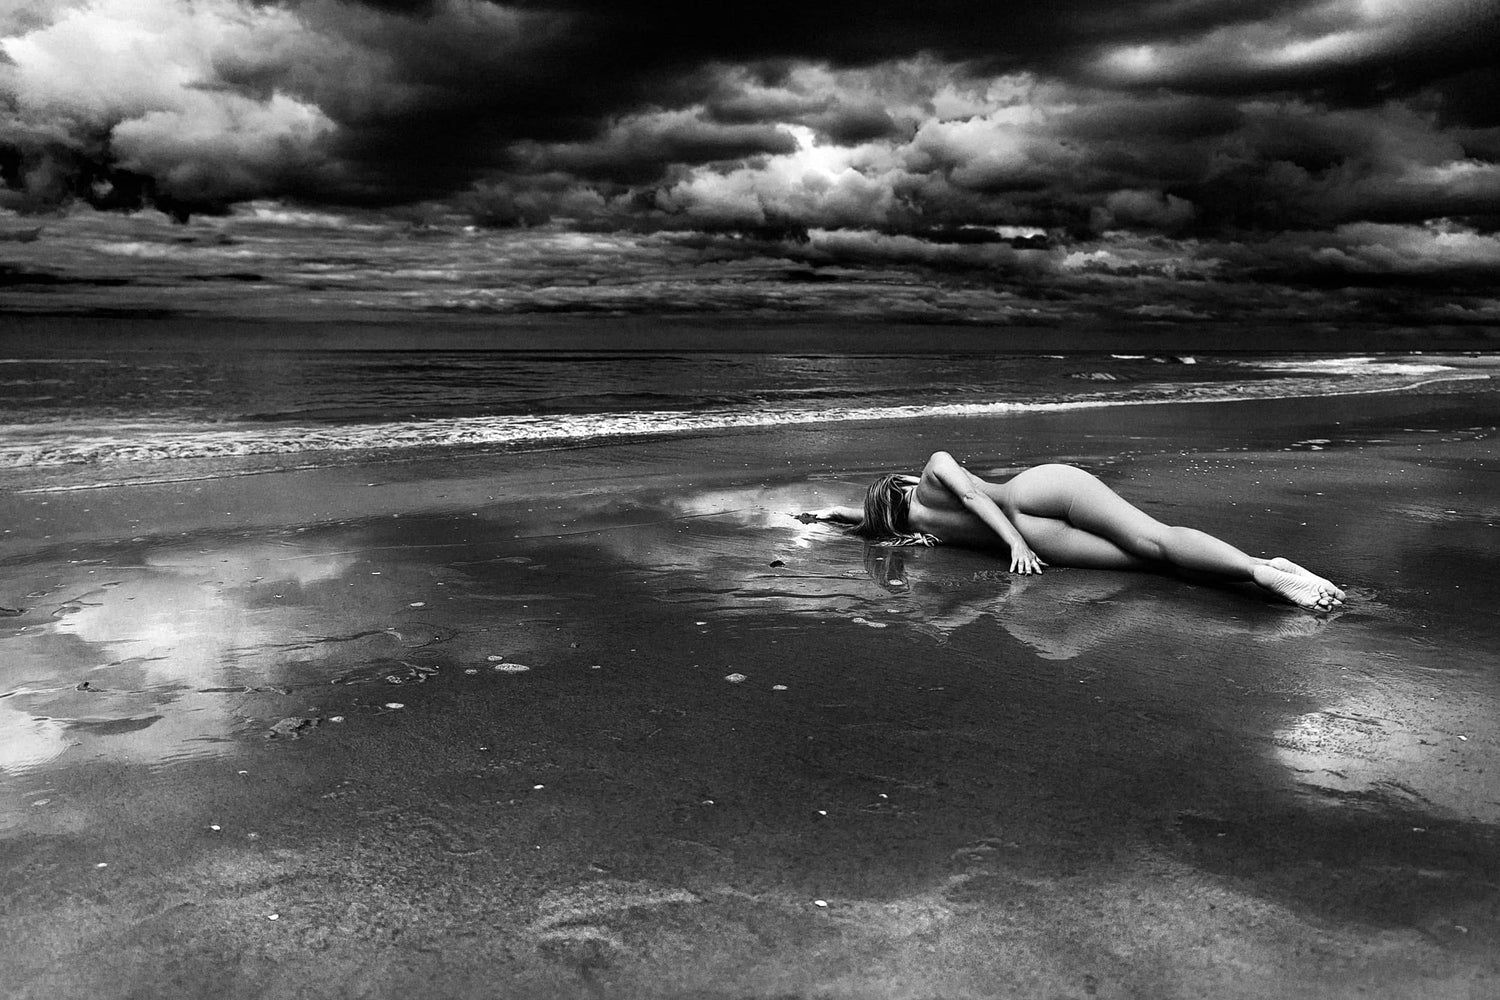 Fine artwork showing a woman laying on the beach edge, with a retreating wave glimmering around, contrasting the quiet and dark surroundings, captured by Ruslan Bolgov, available at Tones Gallery.